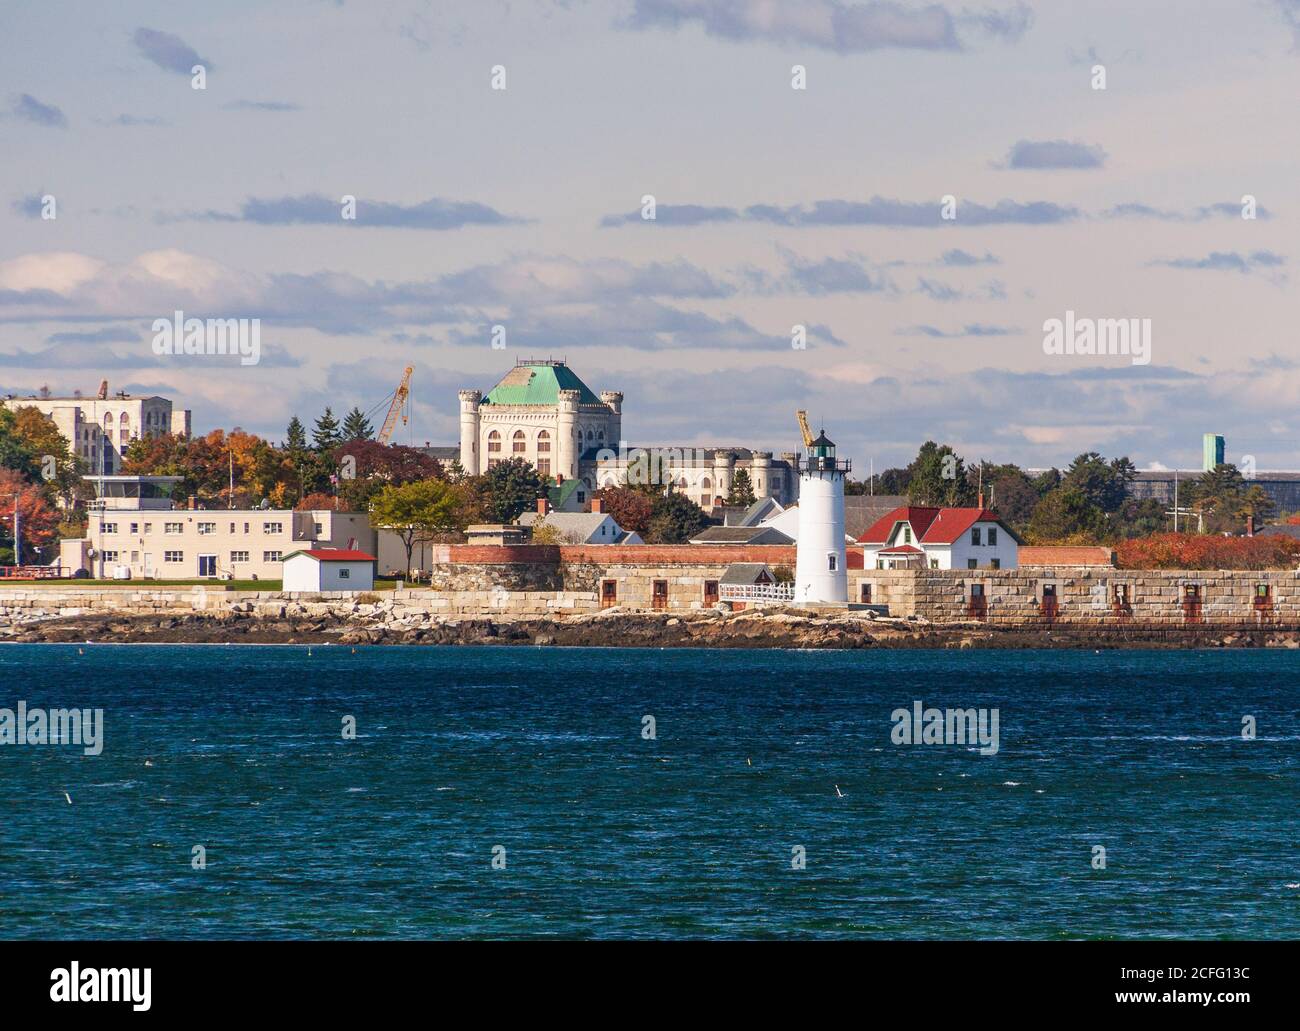 Portsmouth Harbor Lighthouse is located within Fort Constitution on the Piscataqua River in New Castle, New Hampshire, at Portsmouth Harbor. Stock Photo